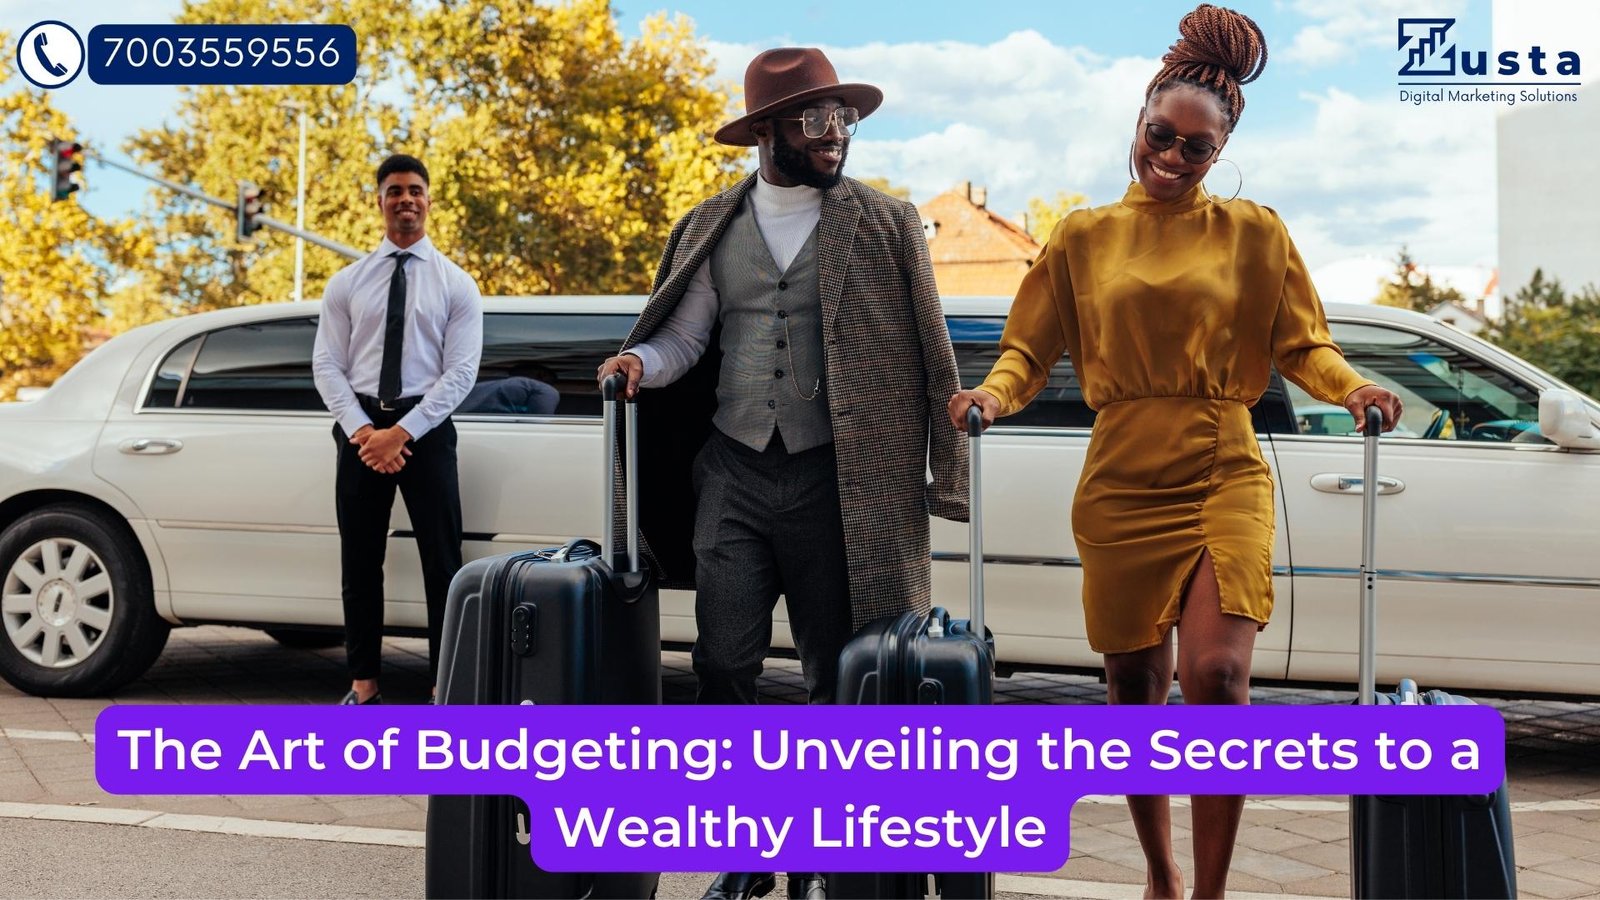 The Art of Budgeting: Unveiling the Secrets to a Wealthy Lifestyle